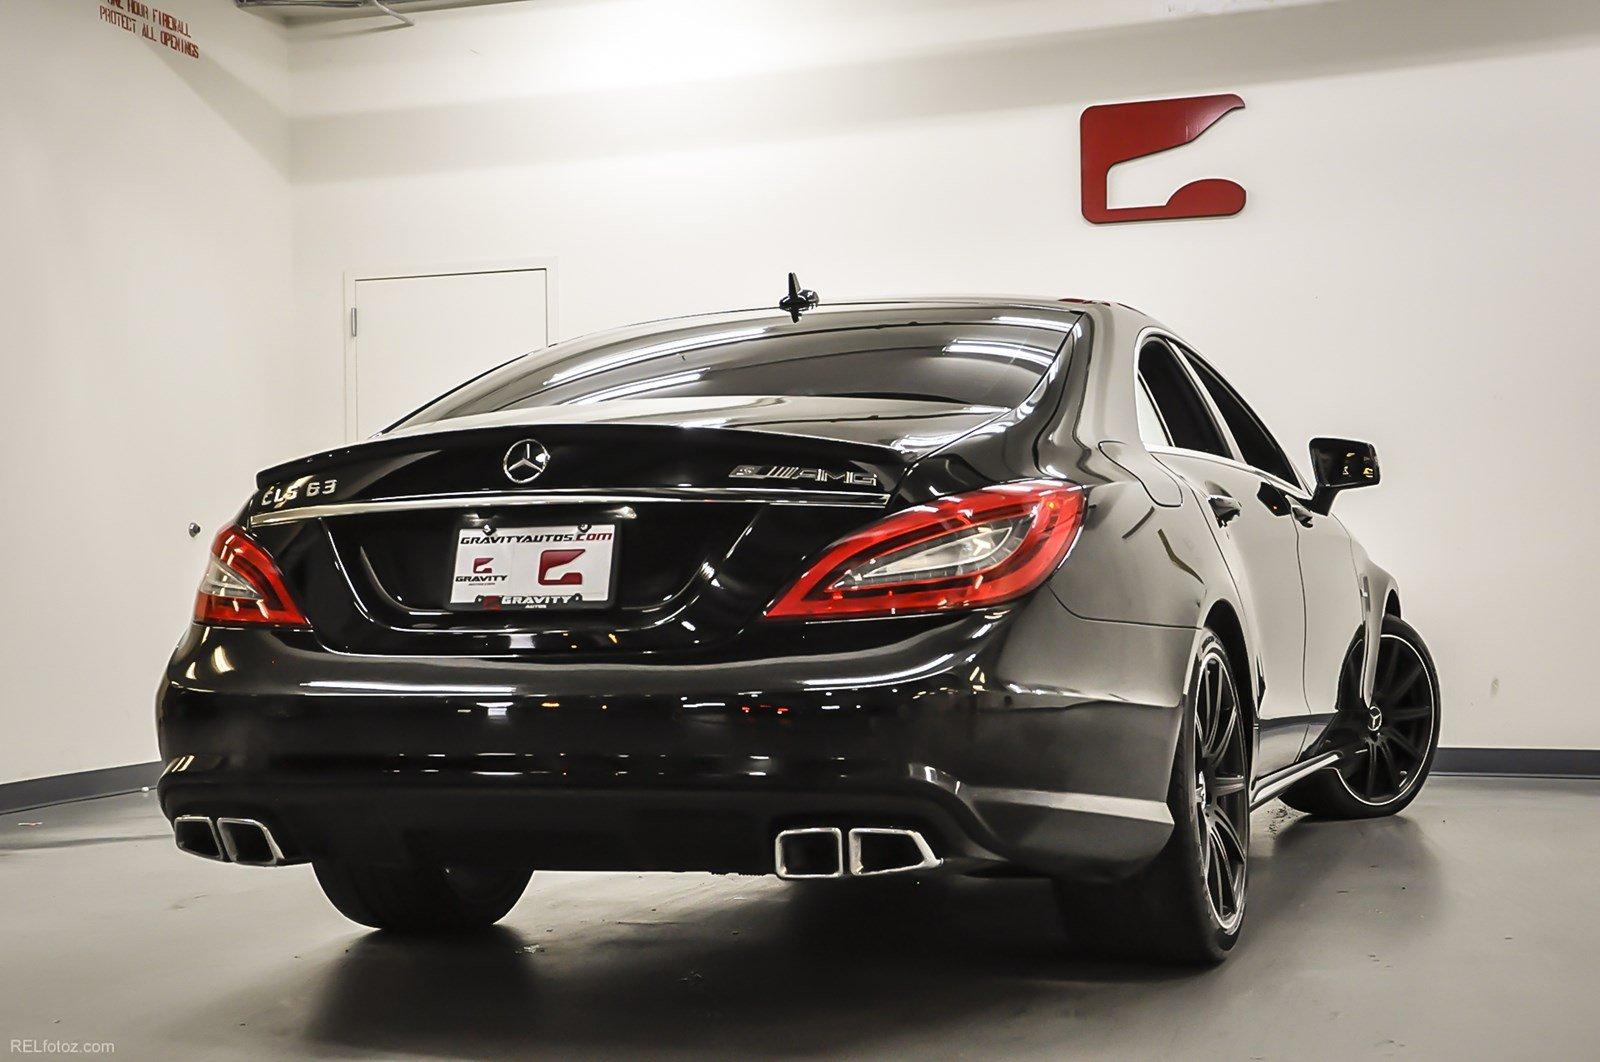 Used 2014 Mercedes-Benz CLS-Class CLS 63 AMG S-Model for sale Sold at Gravity Autos Marietta in Marietta GA 30060 4